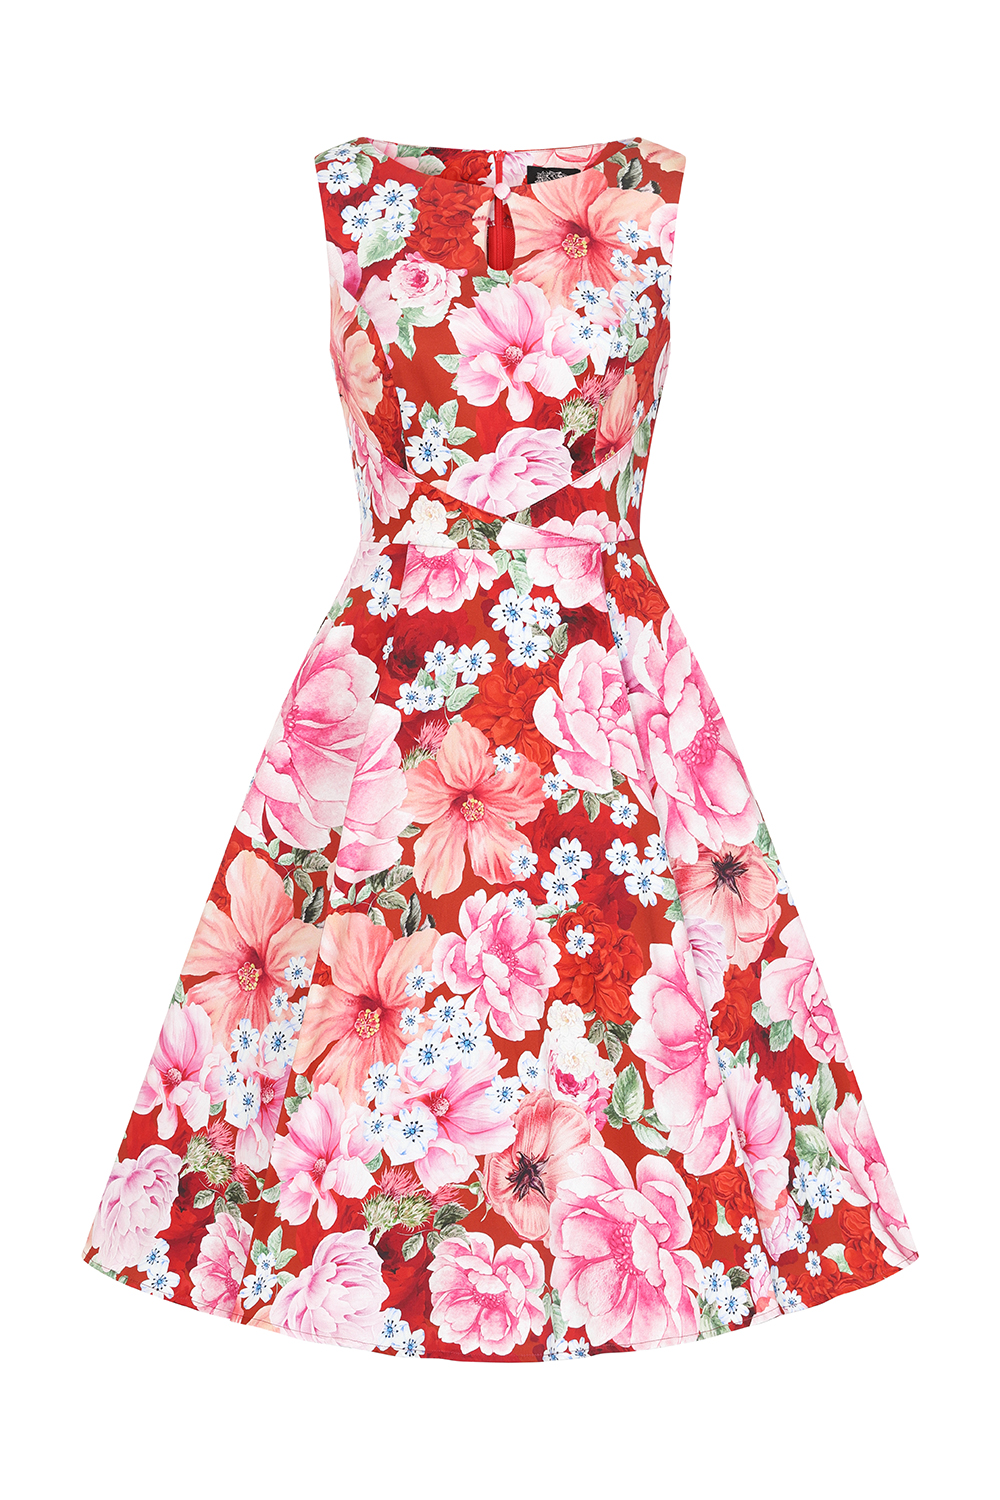 Charlie Floral Swing Dress in Red - Hearts & Roses London